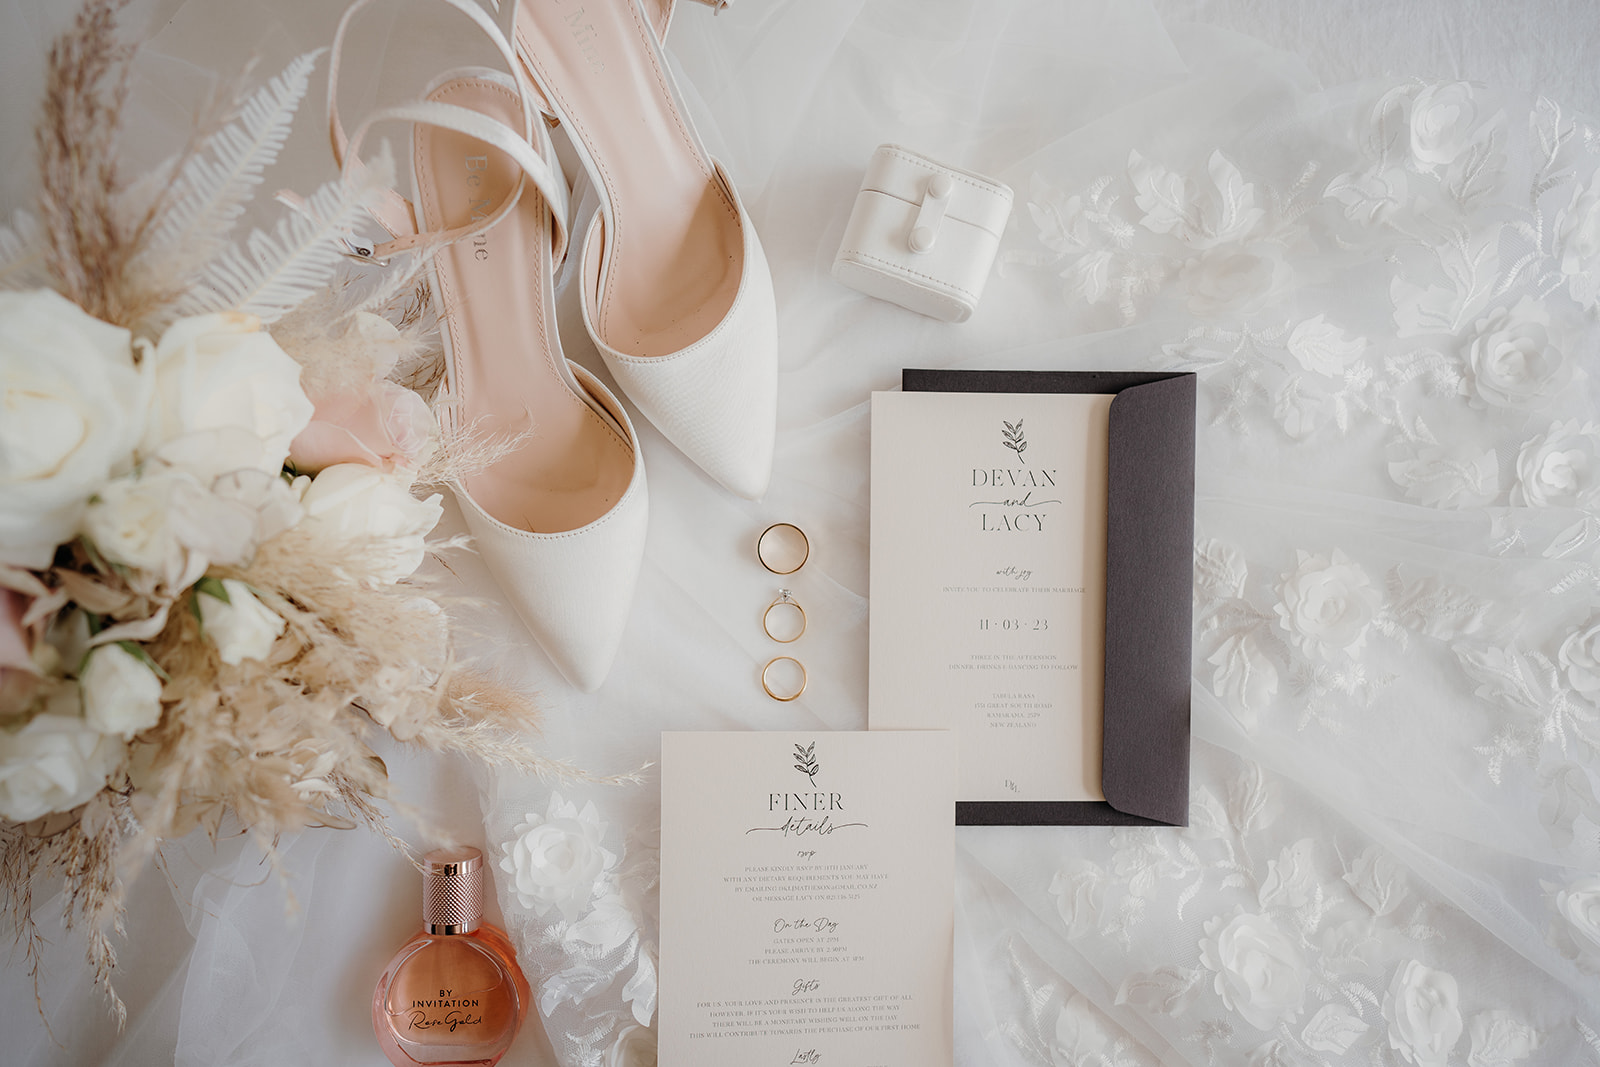 auckland wedding photographer takes a photo of the brides details and accessories including the rings, invitations ect